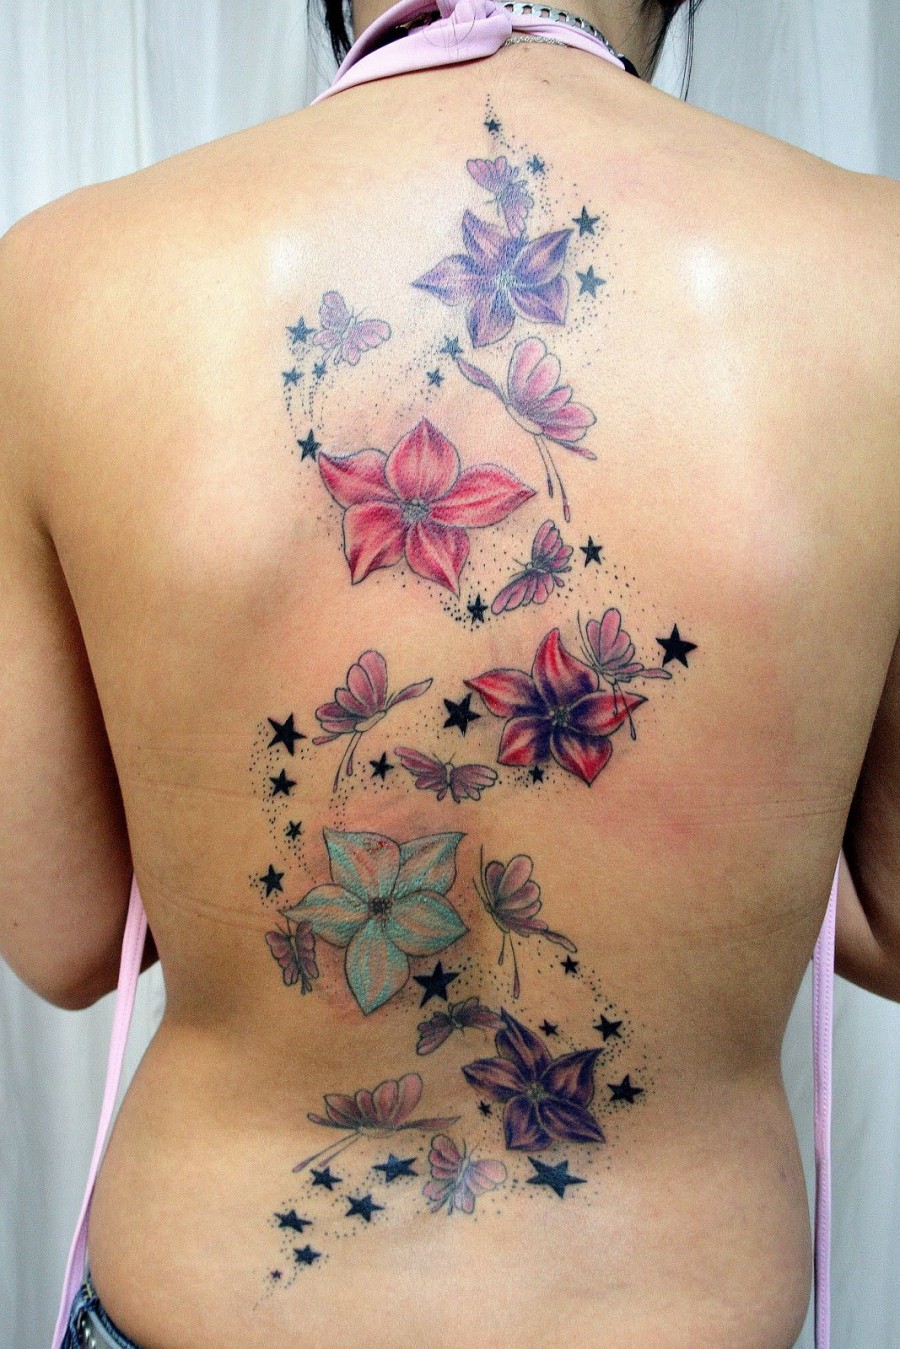 Butterfly and Flower Back Tattoos [NSFW]